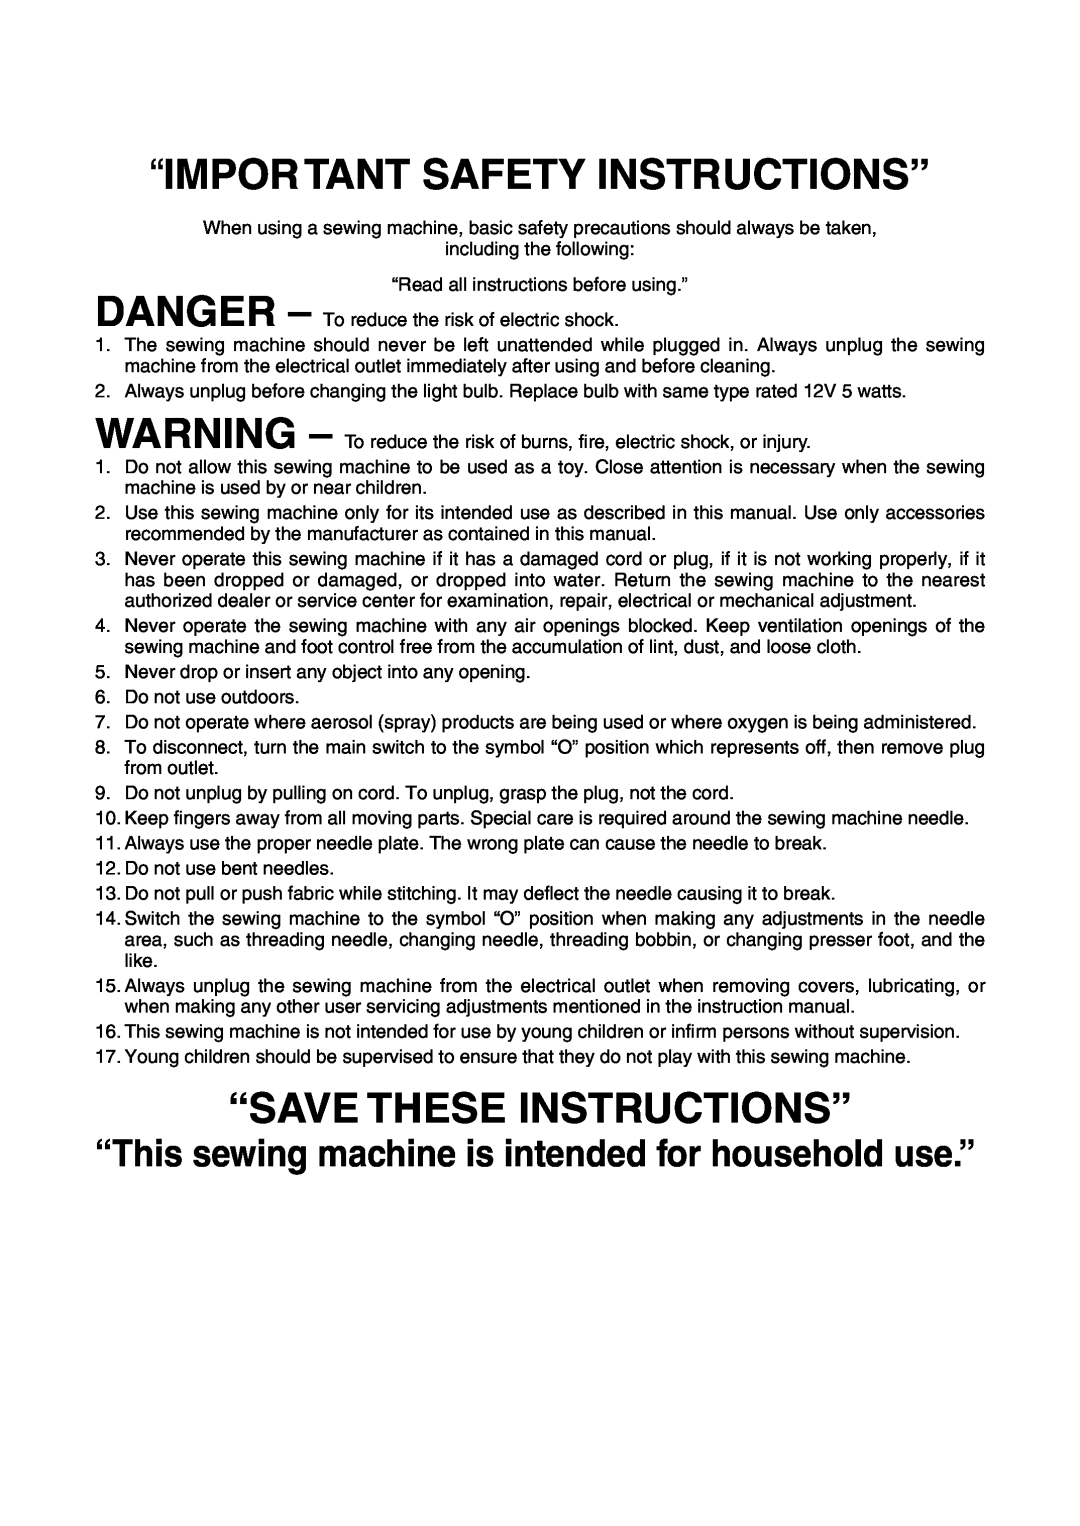 Brother PC 3000 operation manual “Important Safety Instructions”, “Save These Instructions” 